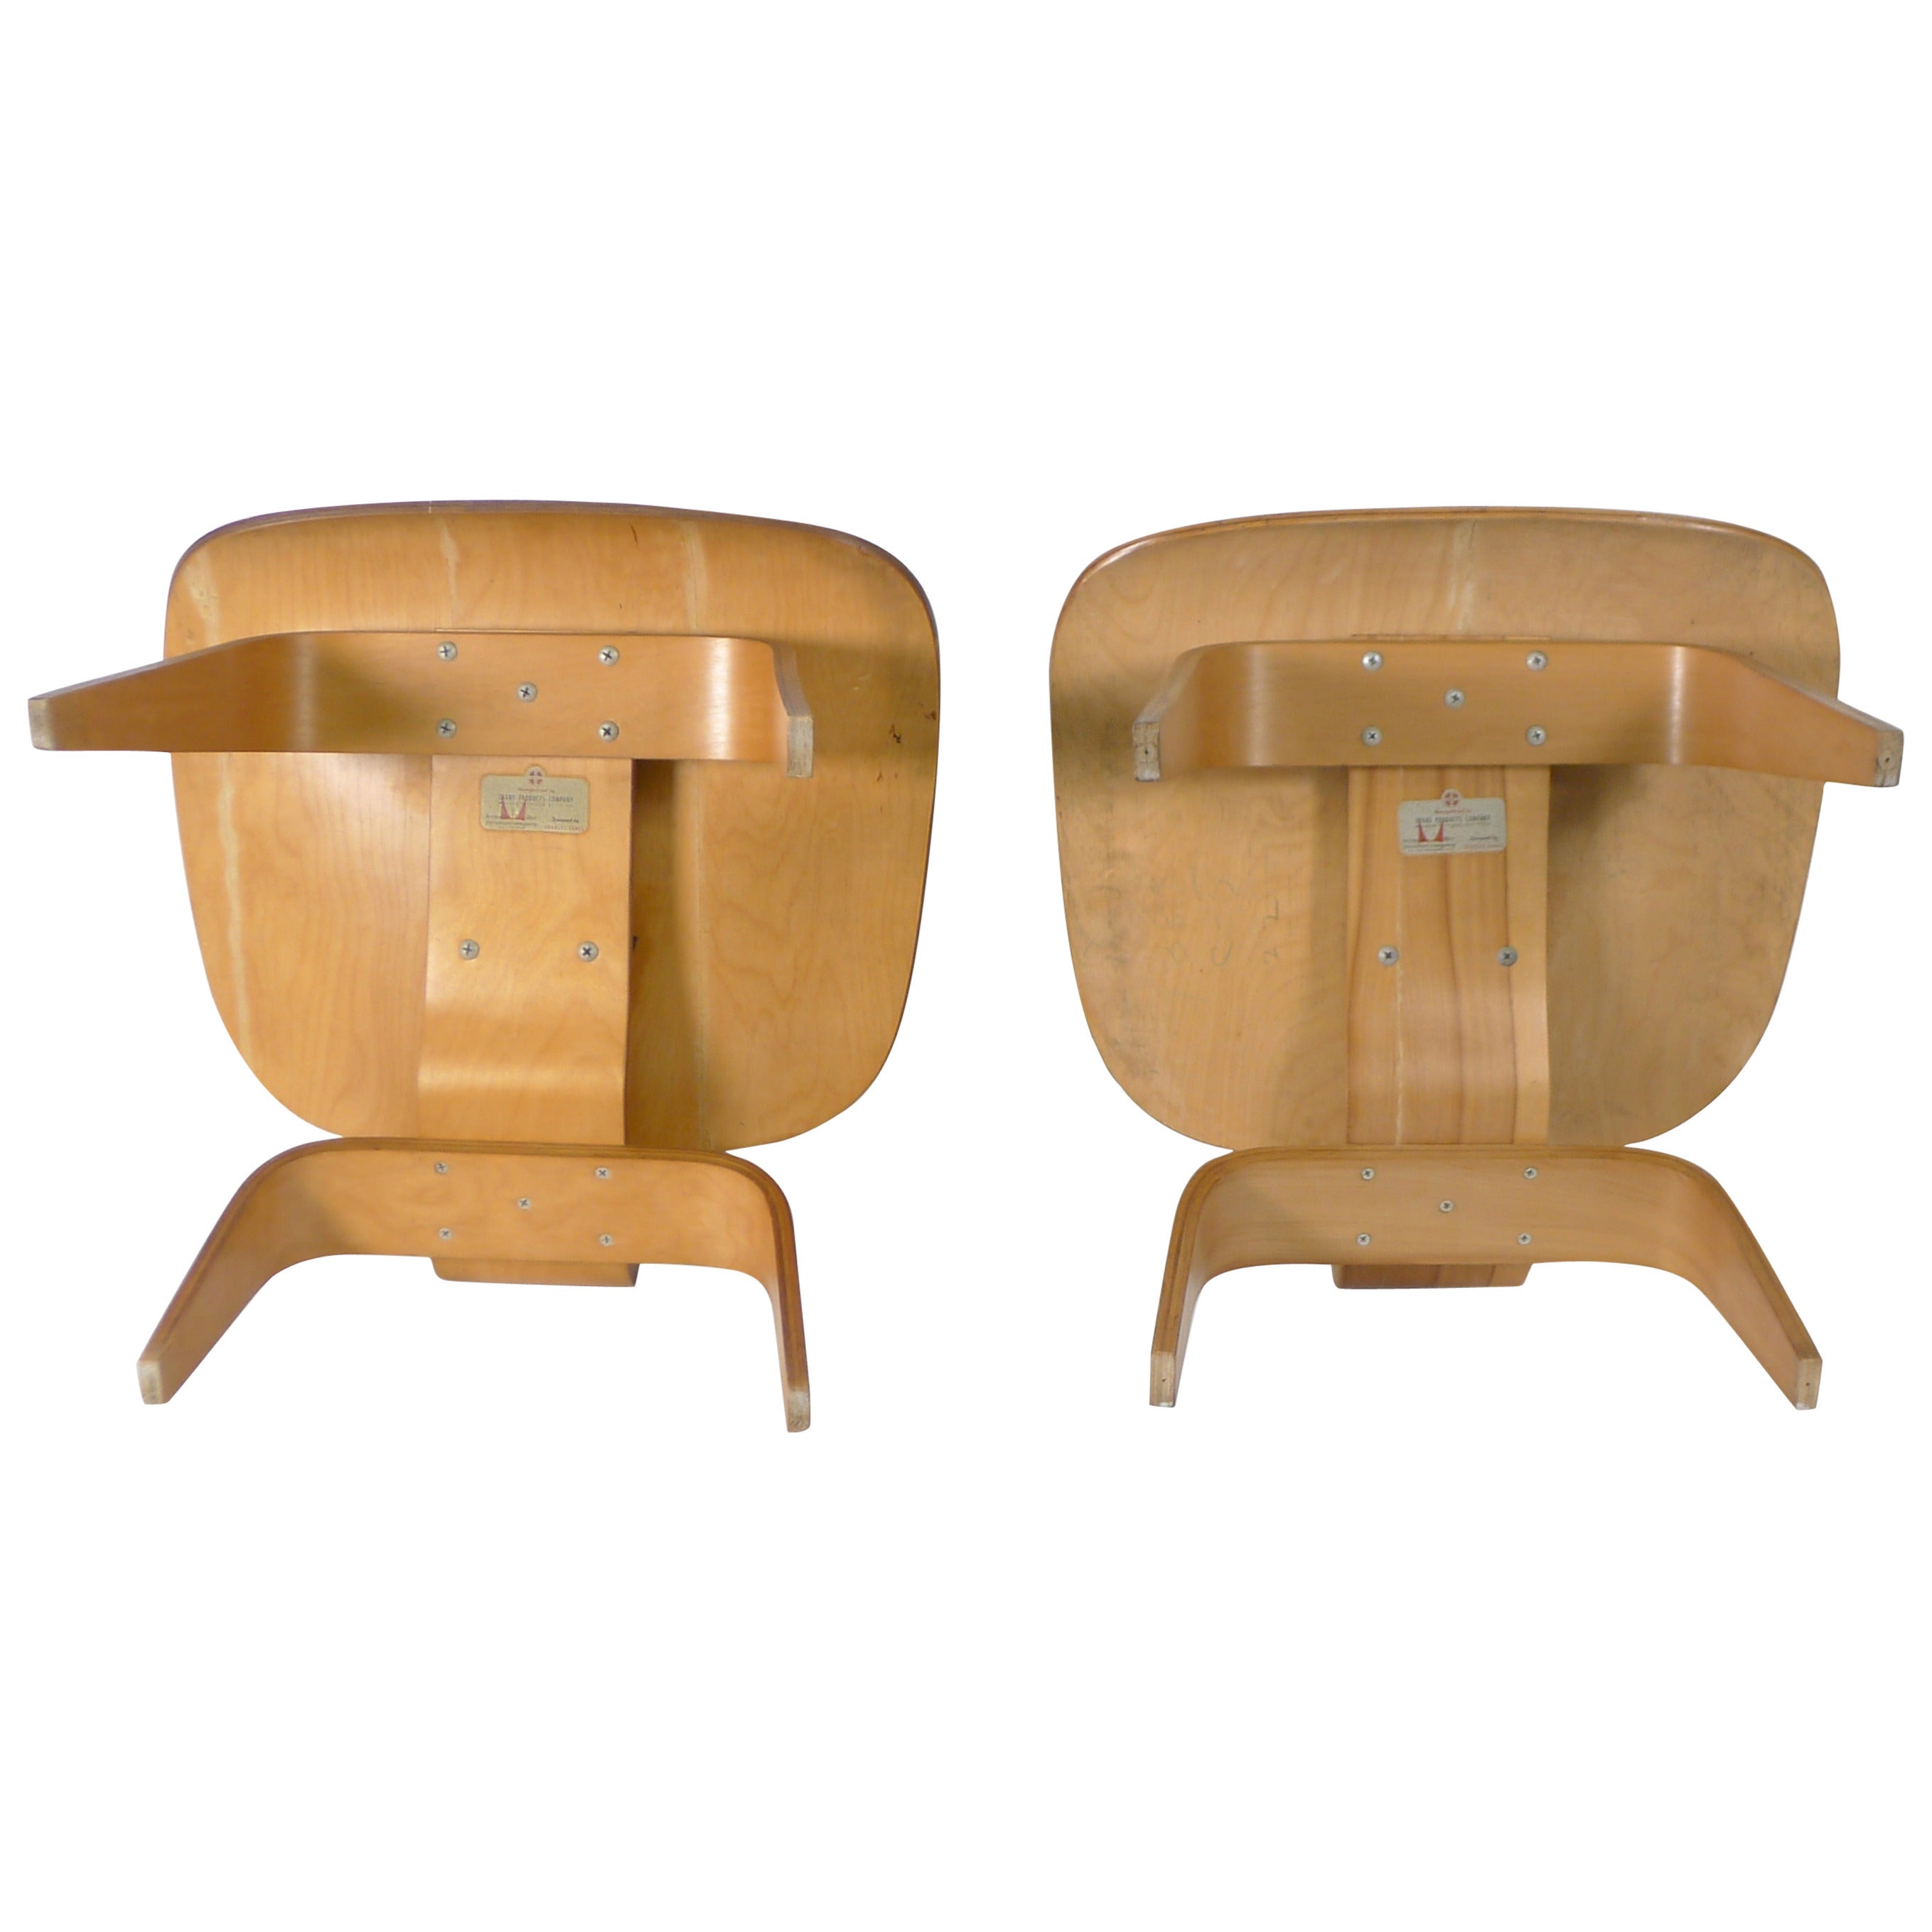 Charles and Ray Eames LCW's, 1948 Evans Labels Chairs